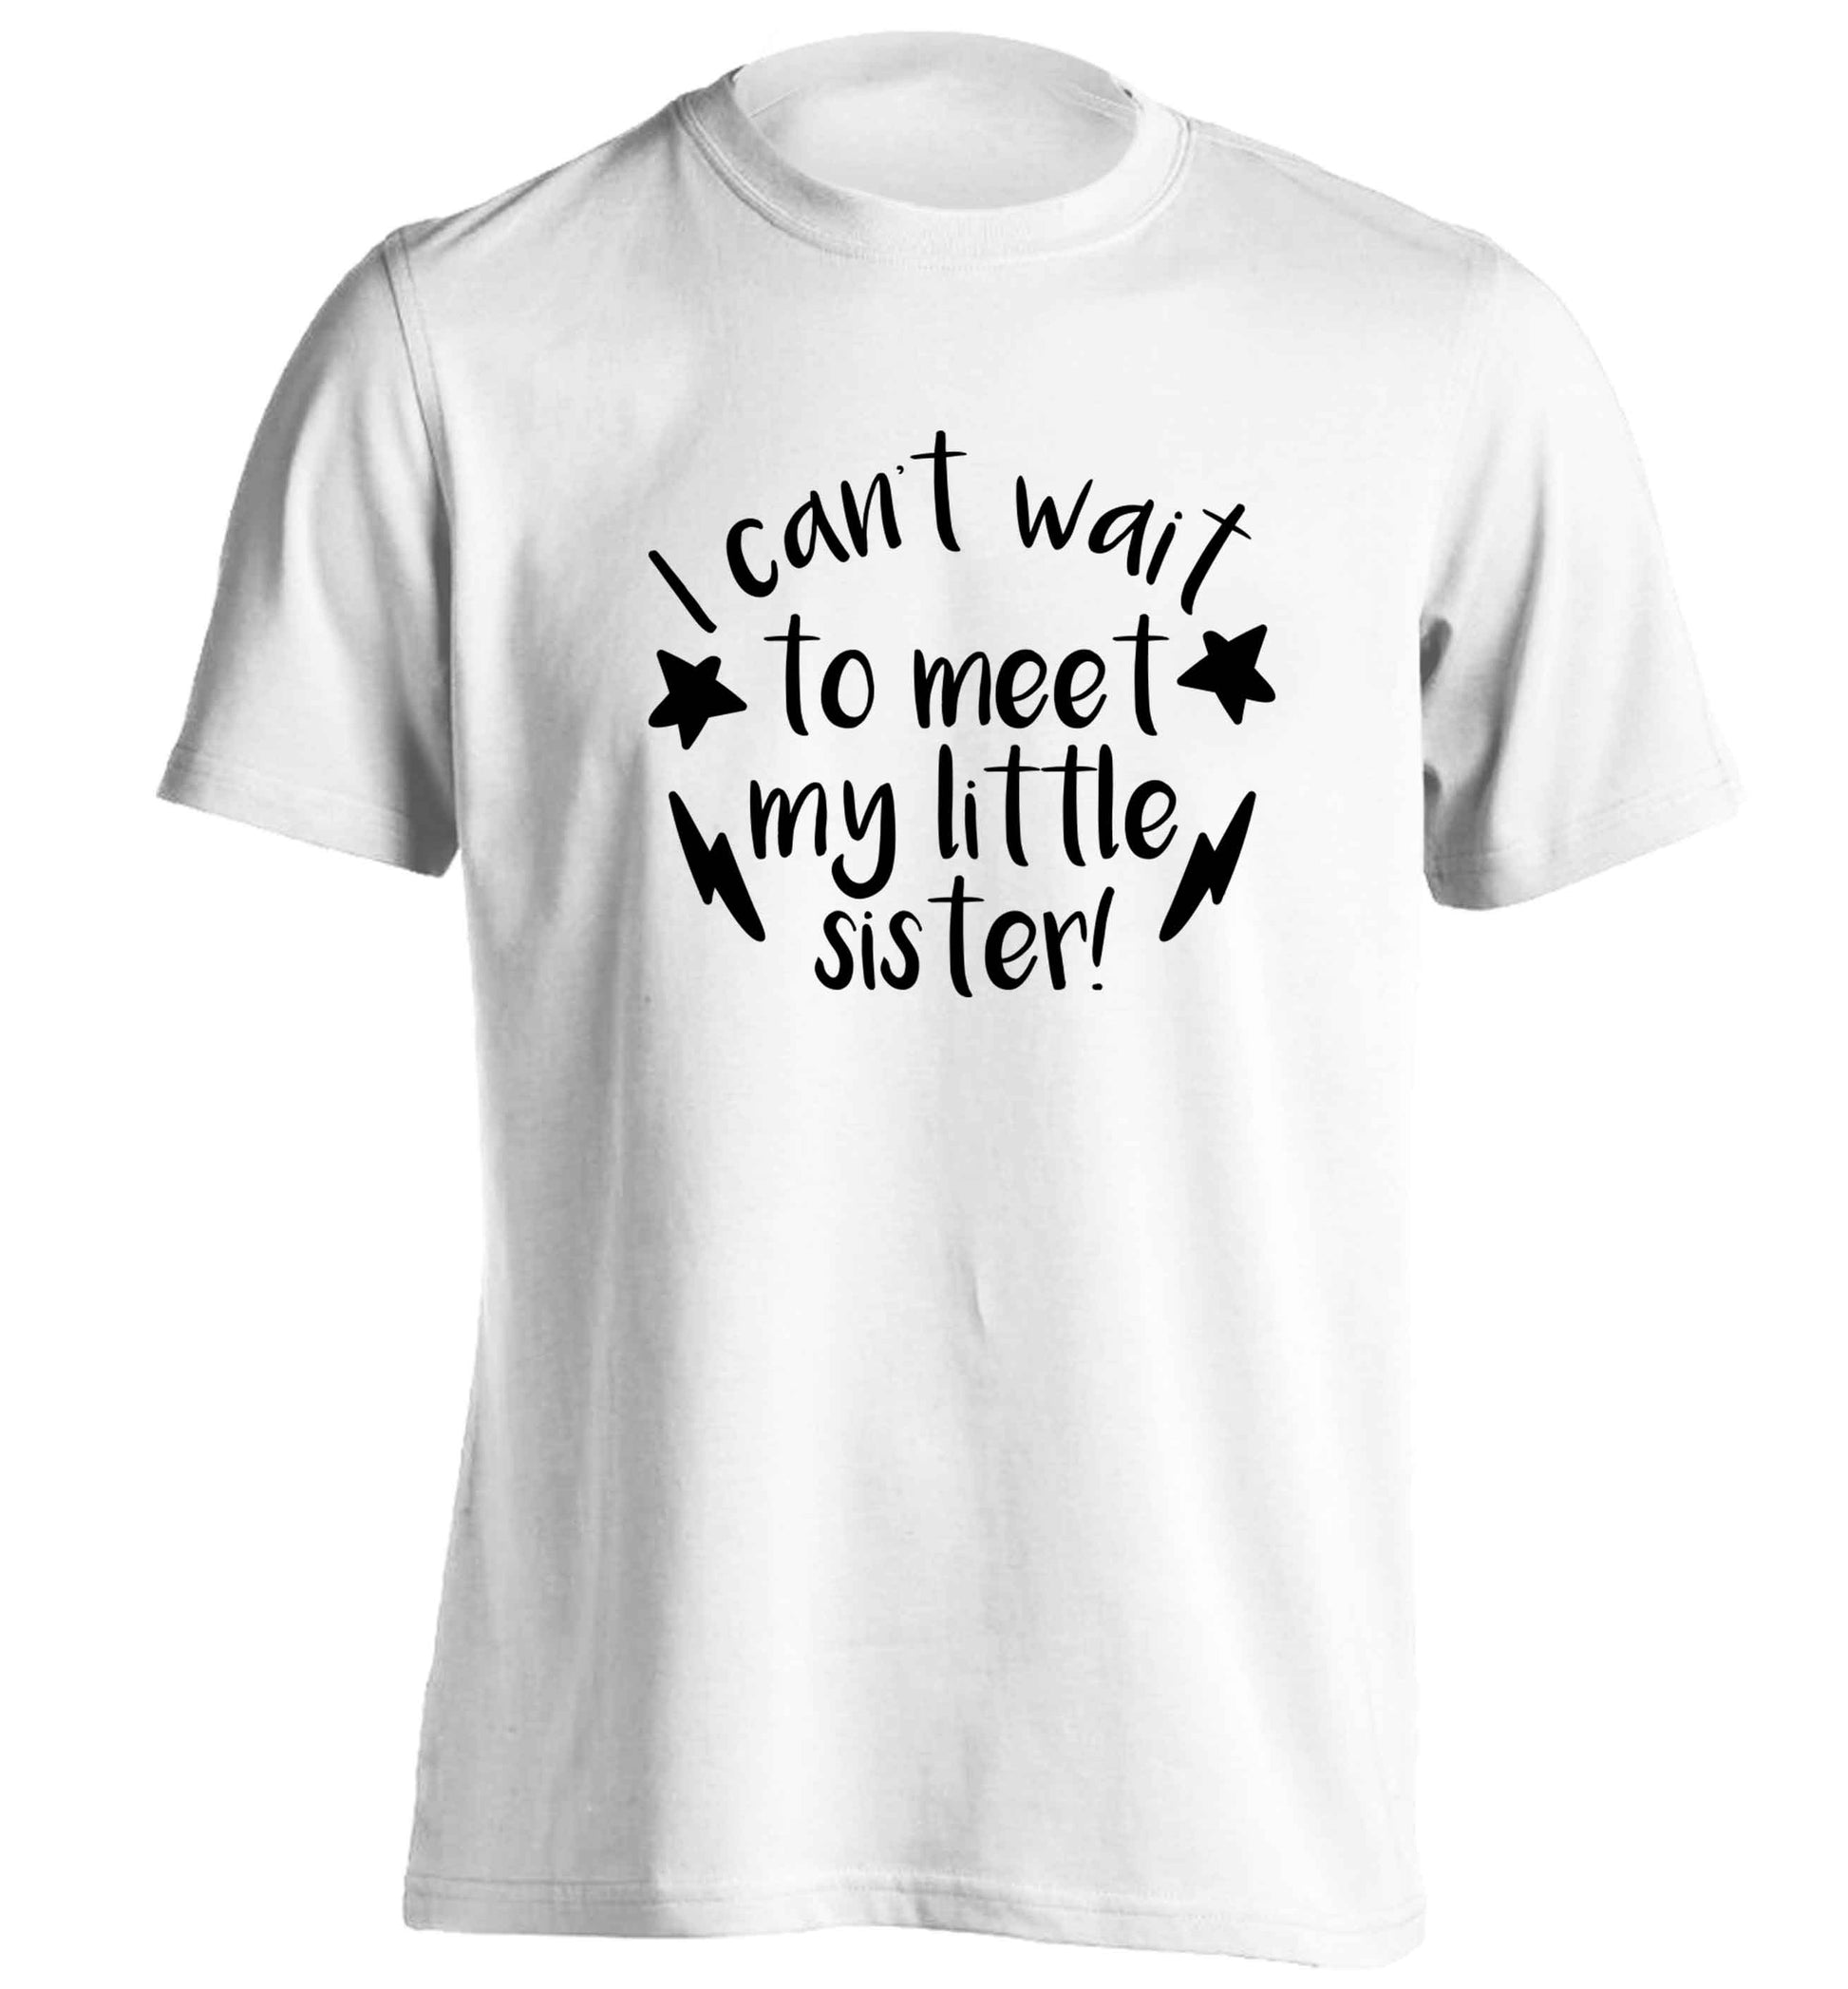 Something special growing inside it's my little sister I can't wait to say hi! adults unisex white Tshirt 2XL